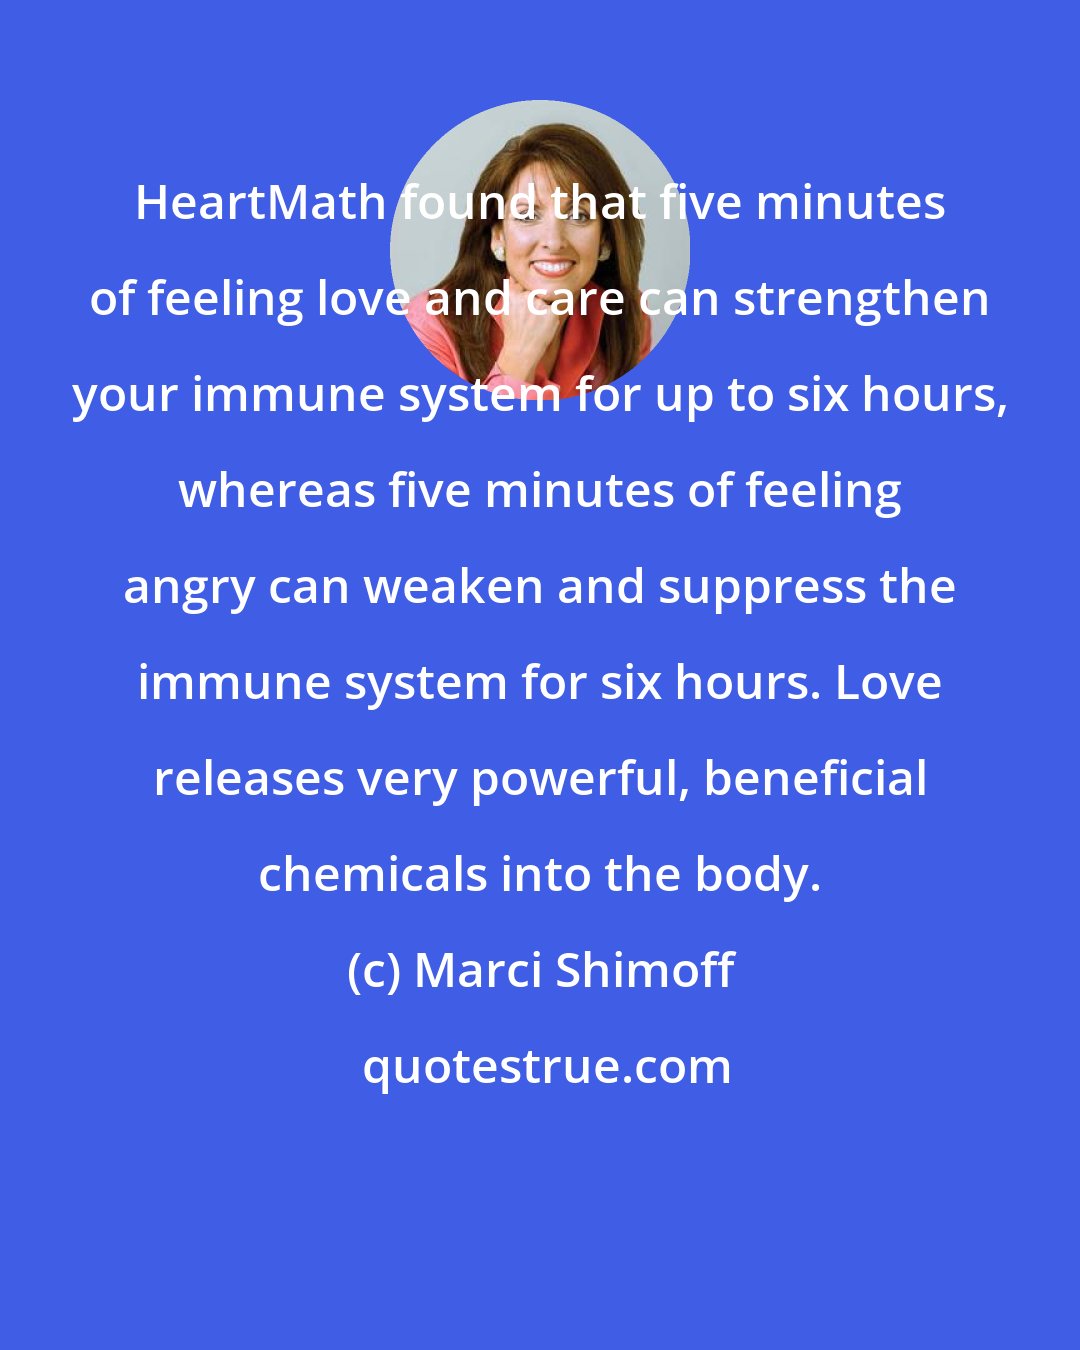 Marci Shimoff: HeartMath found that five minutes of feeling love and care can strengthen your immune system for up to six hours, whereas five minutes of feeling angry can weaken and suppress the immune system for six hours. Love releases very powerful, beneficial chemicals into the body.